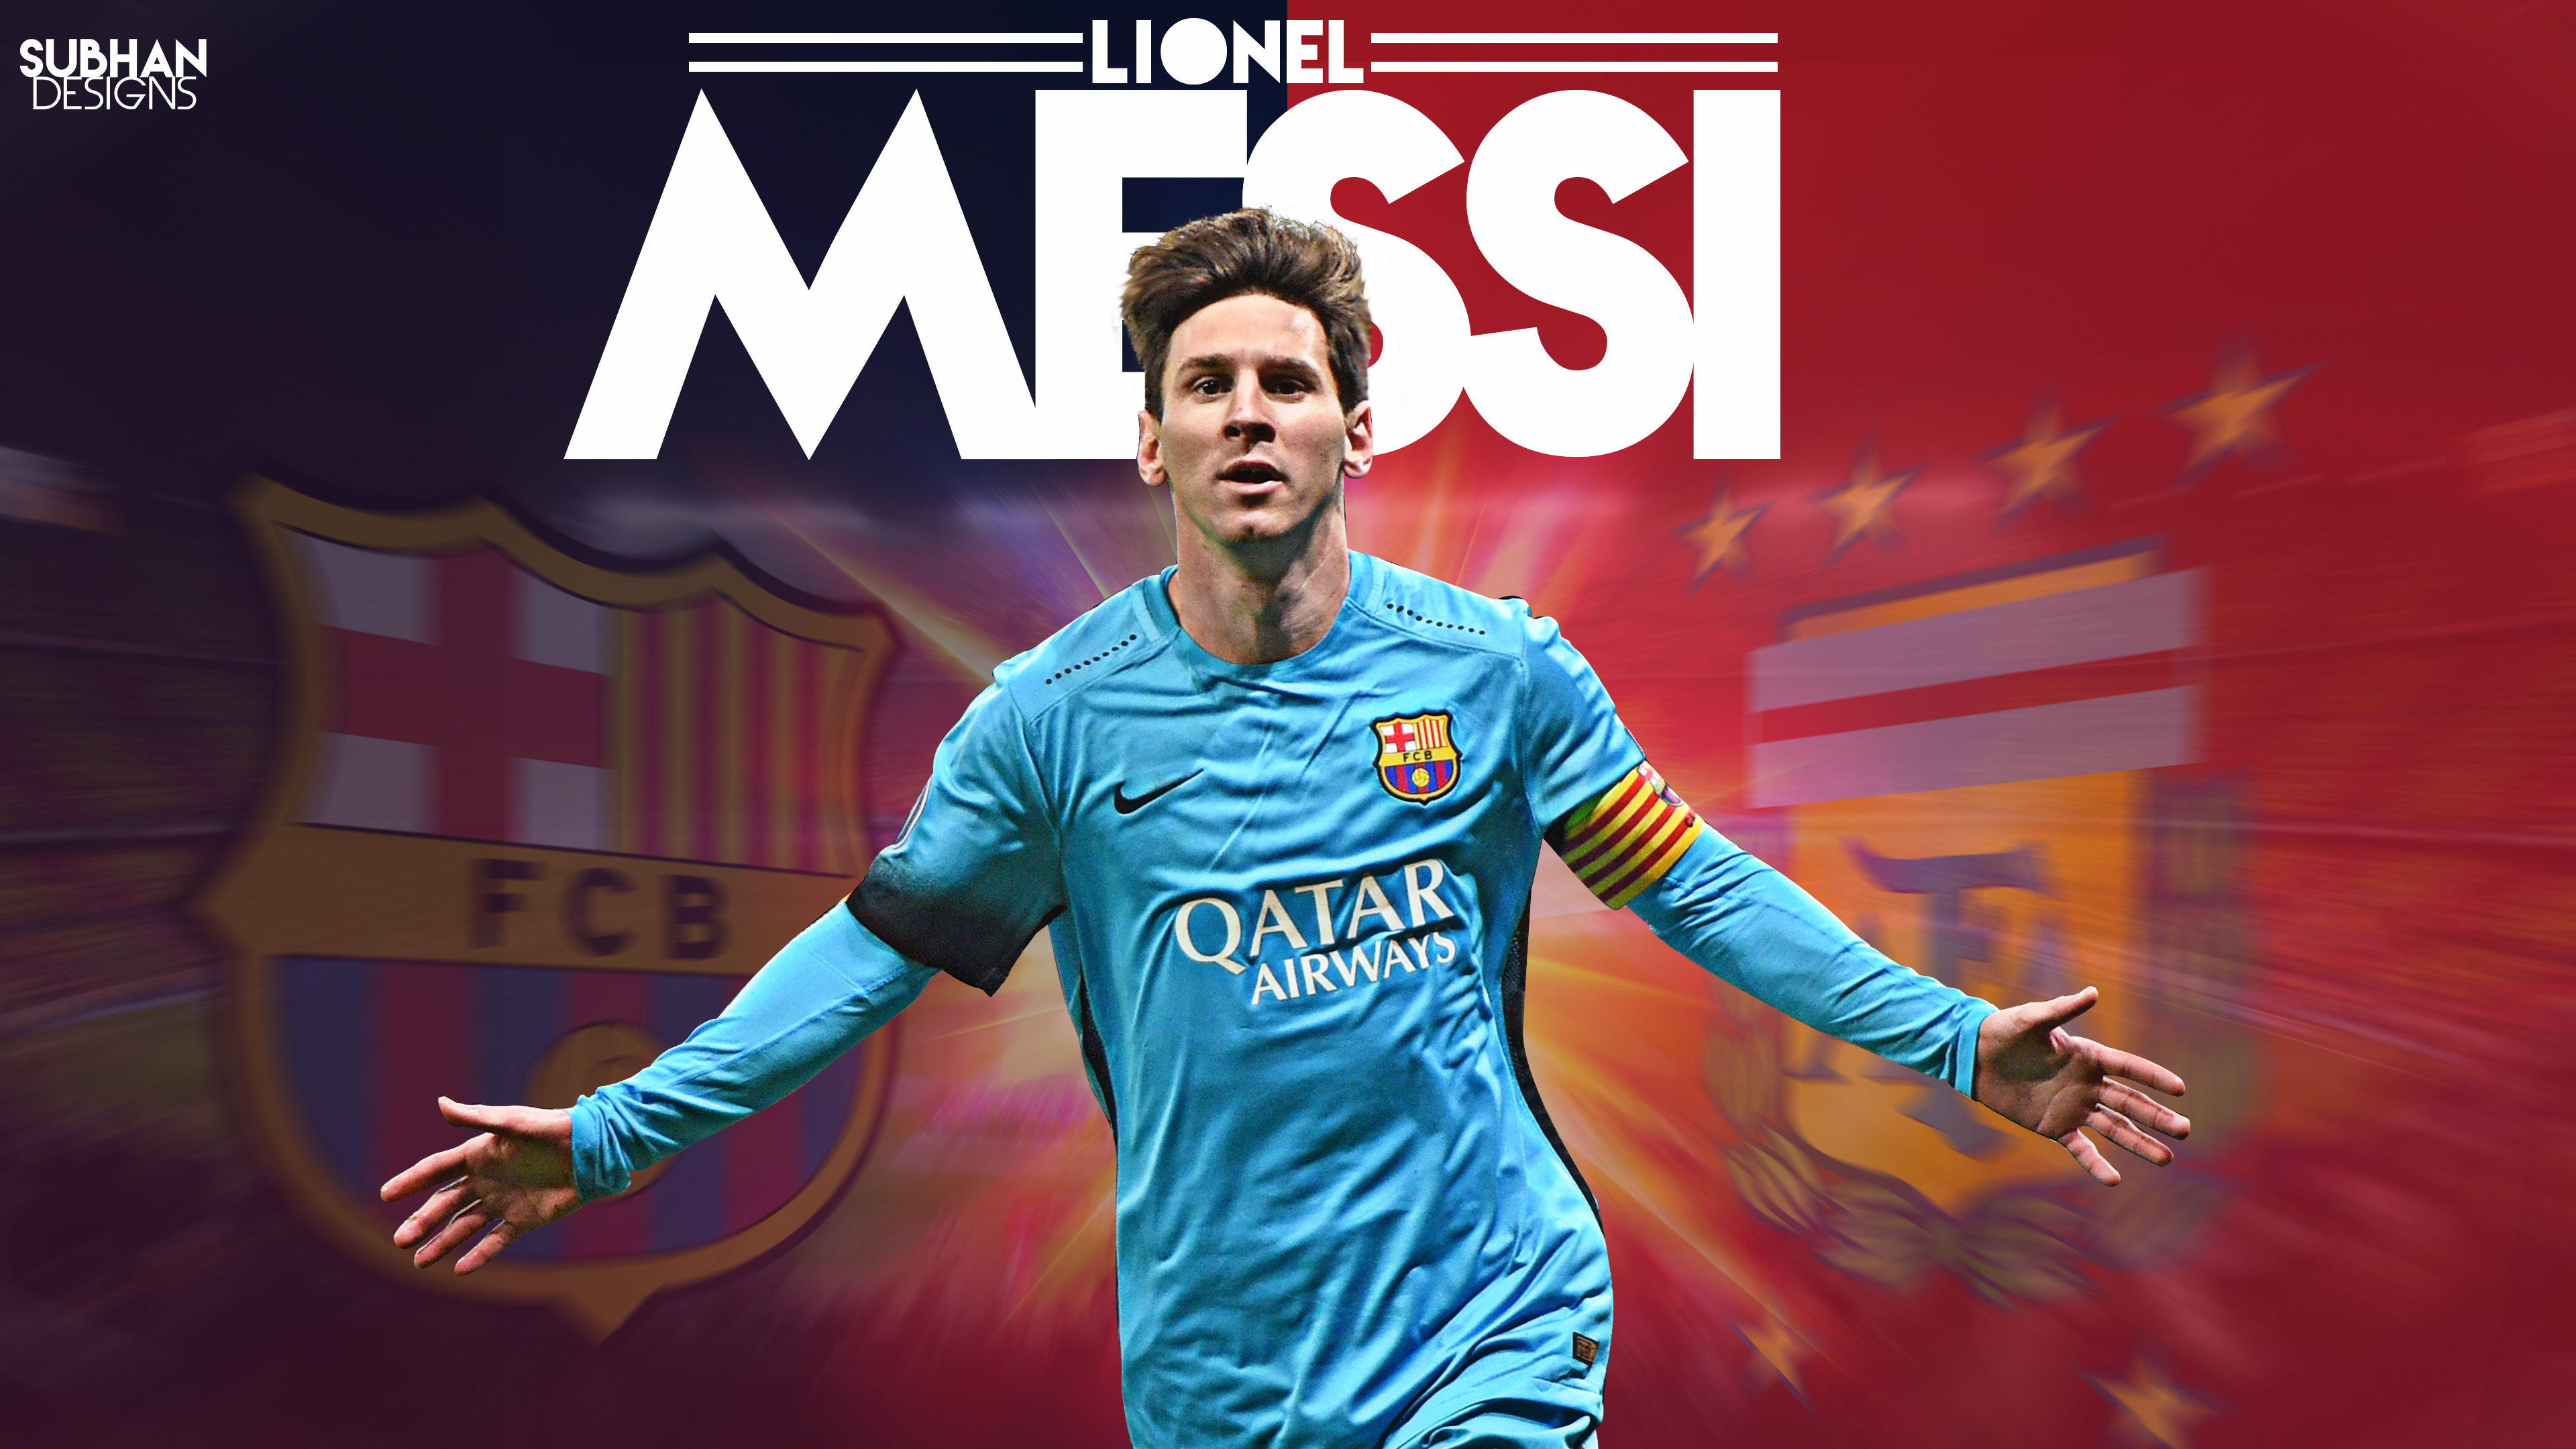 Lionel Messi 2016 Wallpaper HD   HD Wallpapers Backgrounds